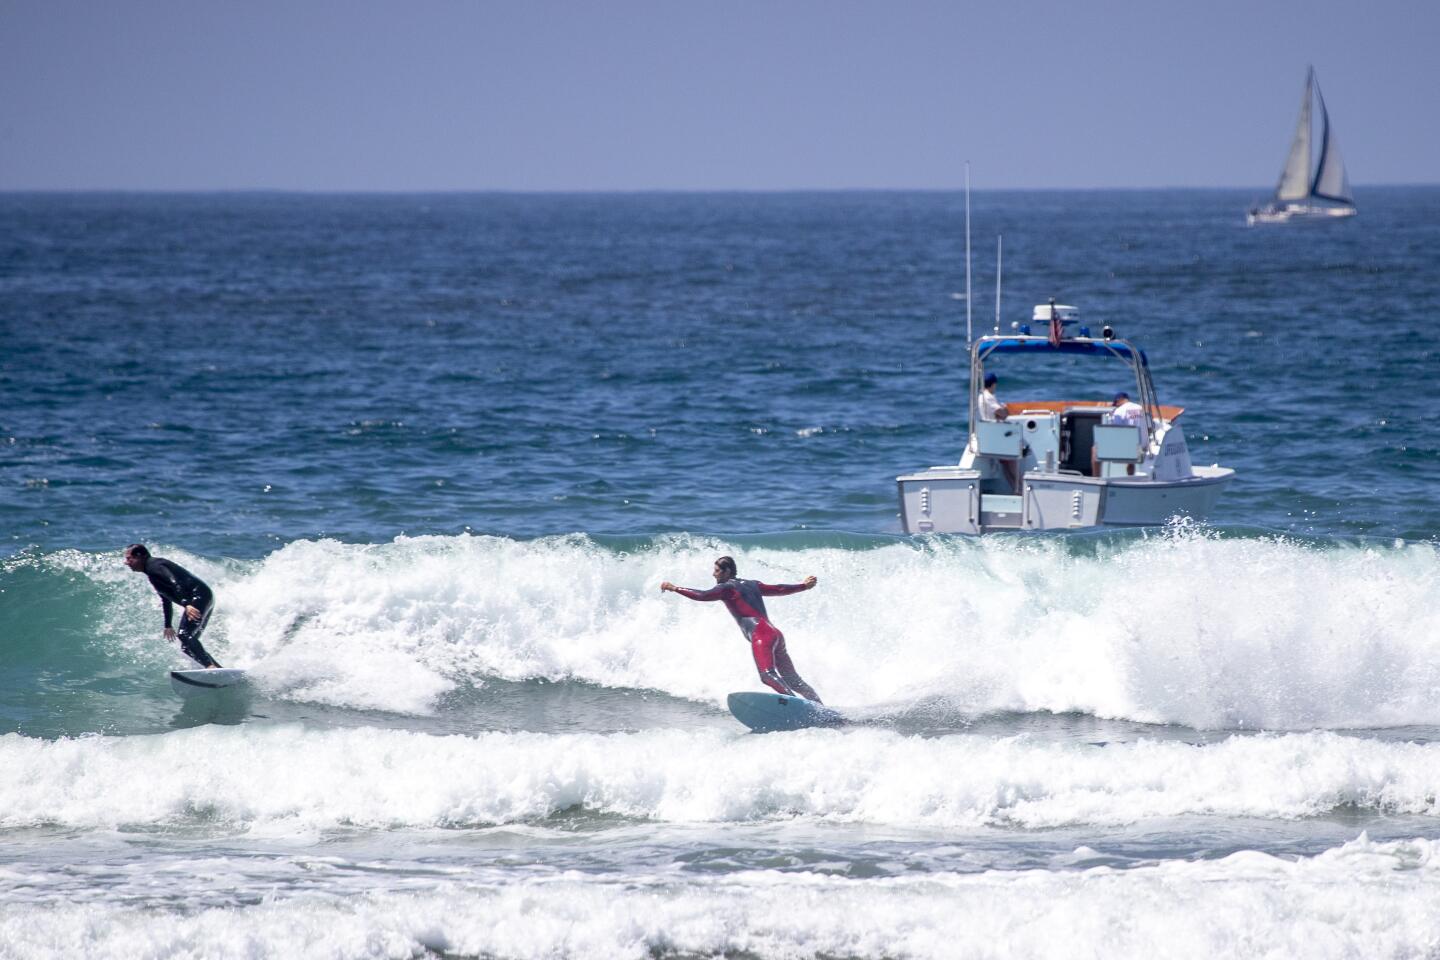 Lifeguards patrol with a boat as surfers ride waves